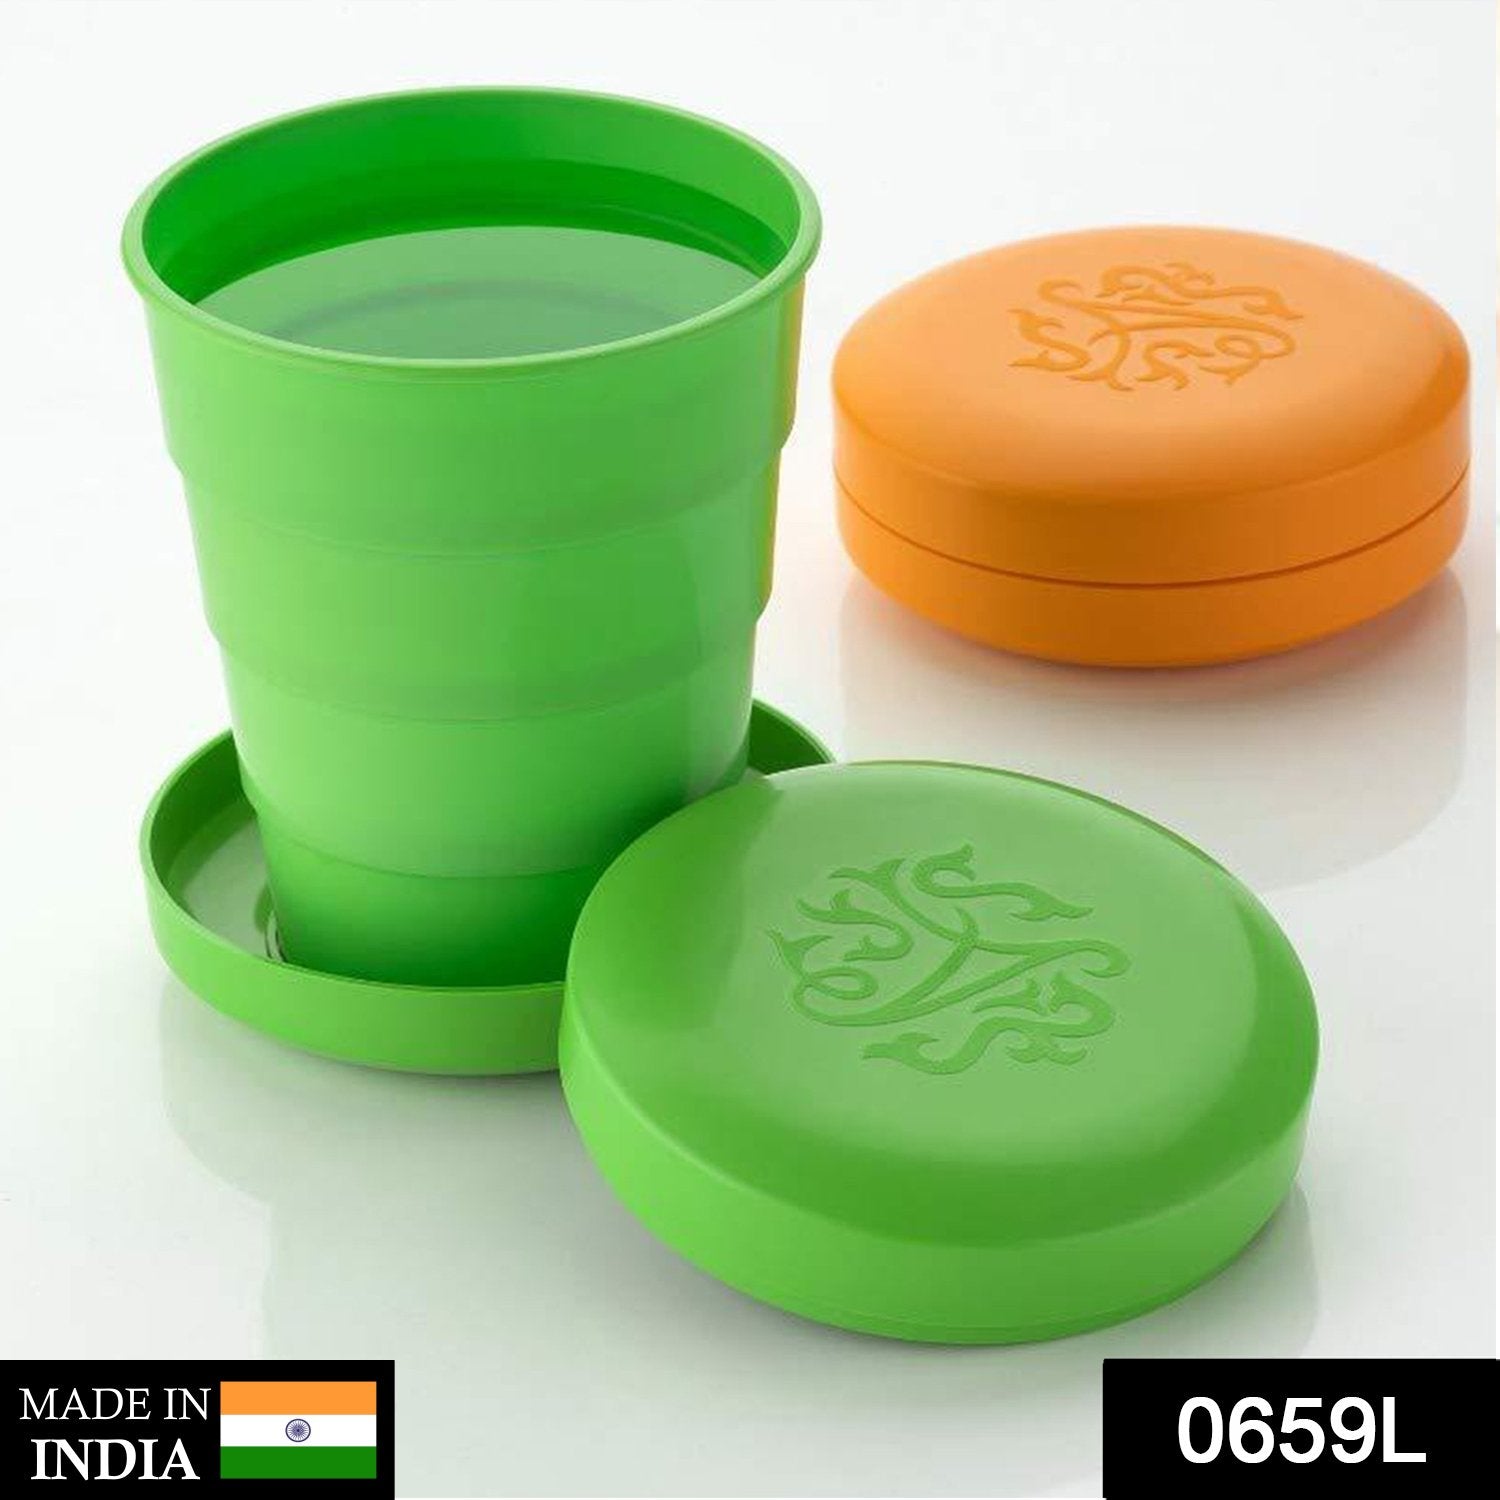 0659L Unbreakable Magic Cup/Folding/Pocket Glass for Travelling